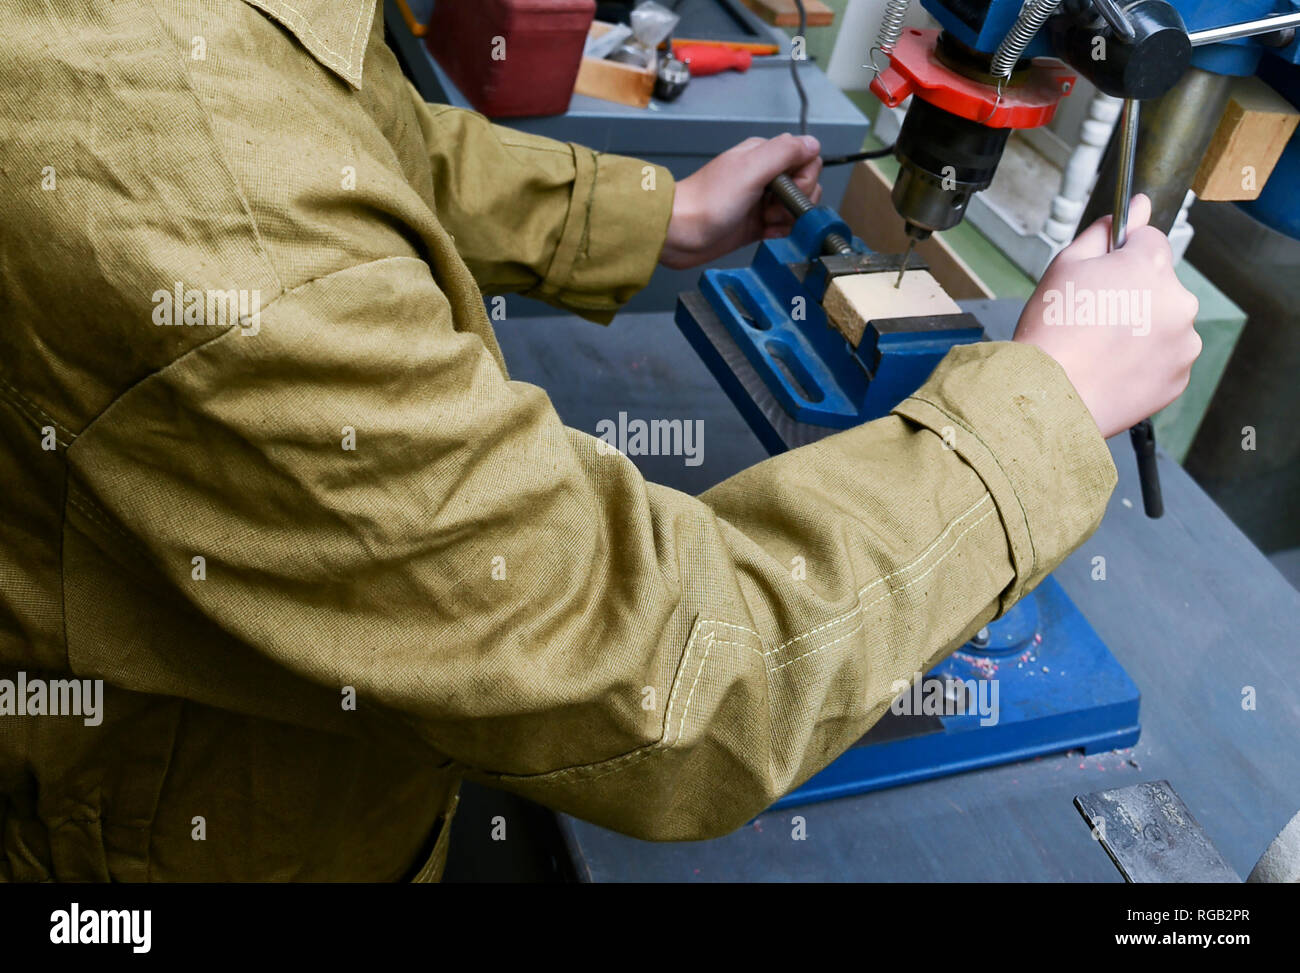 Male student using drilling machine in school workshop, vocational education at school Stock Photo